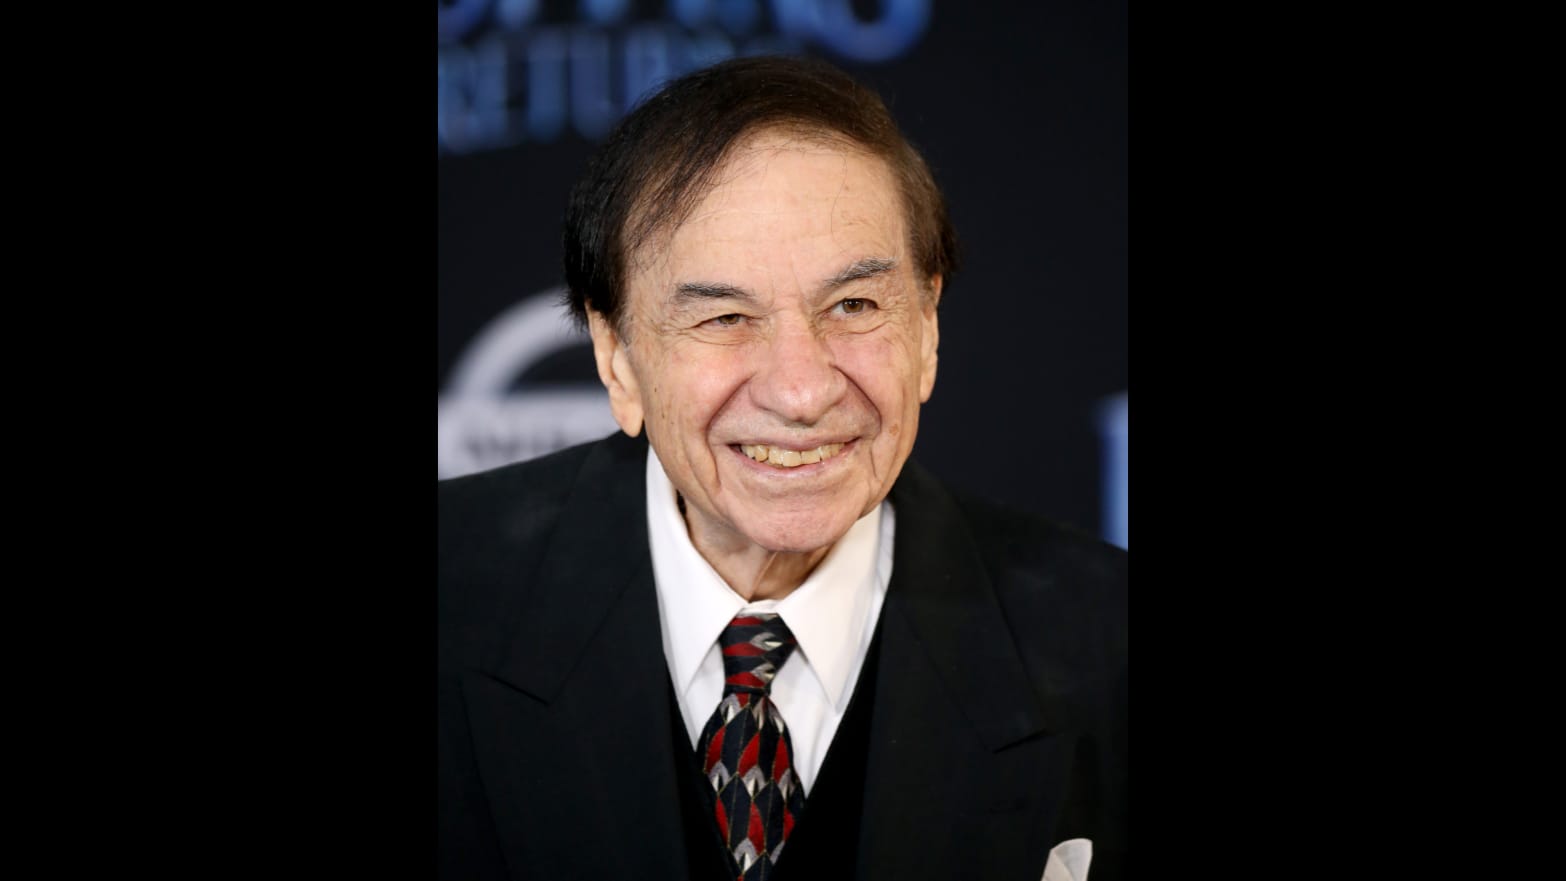 Richard M. Sherman arrives to the World Premiere Of Disney's "Mary Poppins Returns" held at The Dolby Theatre on November 29, 2018 in Los Angeles, California.